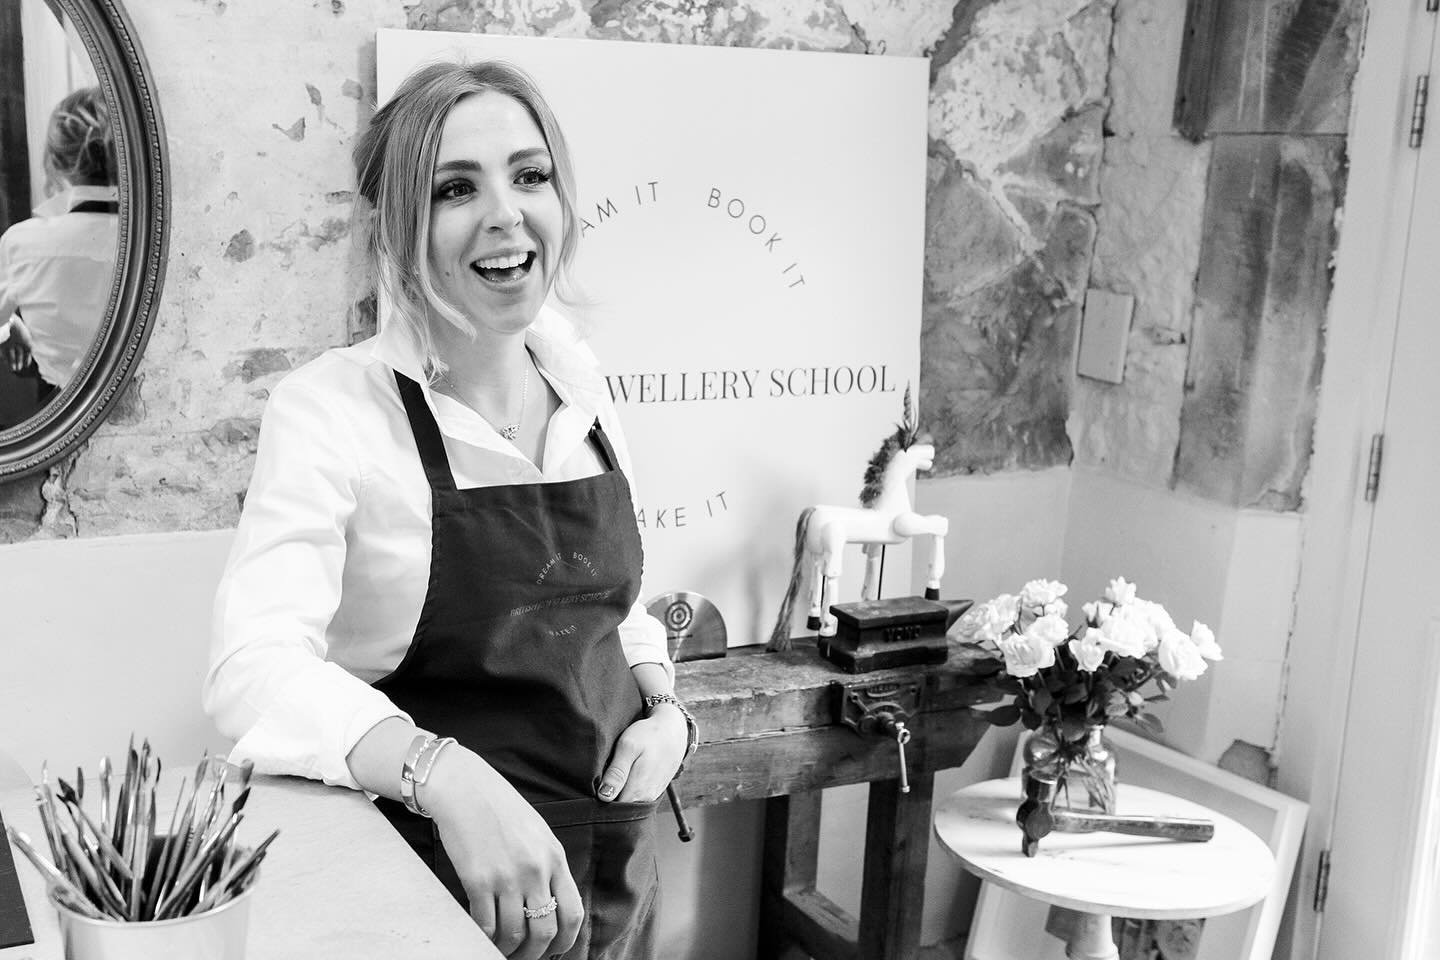 Hello Rachel here! 👋 I&rsquo;m the CEO and founder of the British Jewellery School and today I am celebrating 15 years in the Fine Jewellery Industry. 

Time truly flies when you&rsquo;re doing what you love! It&rsquo;s hard to believe that I&rsquo;